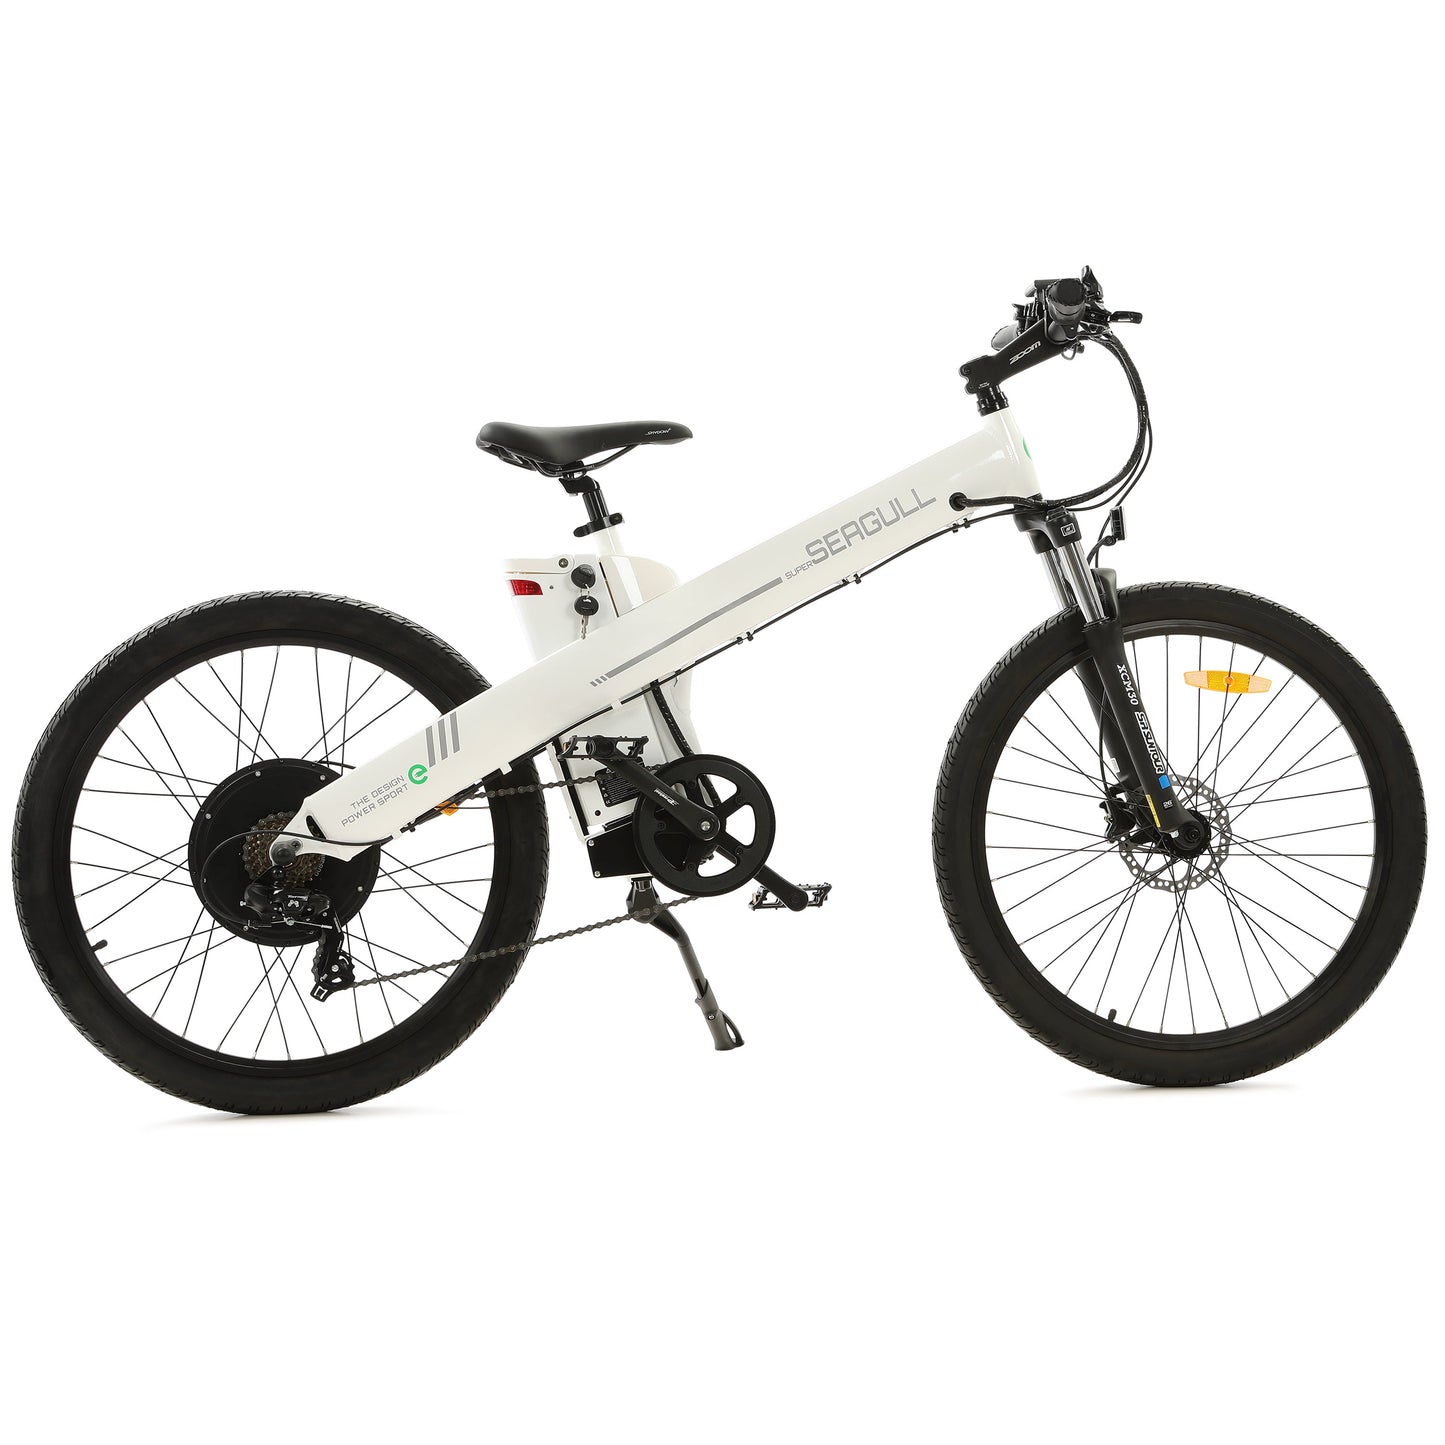 Ecotric Seagull 1000W Brushless Motor For Long Life Span and Efficiency - Versatile Electric Mountain Bike For Commuters, Campers, Leisure Riders